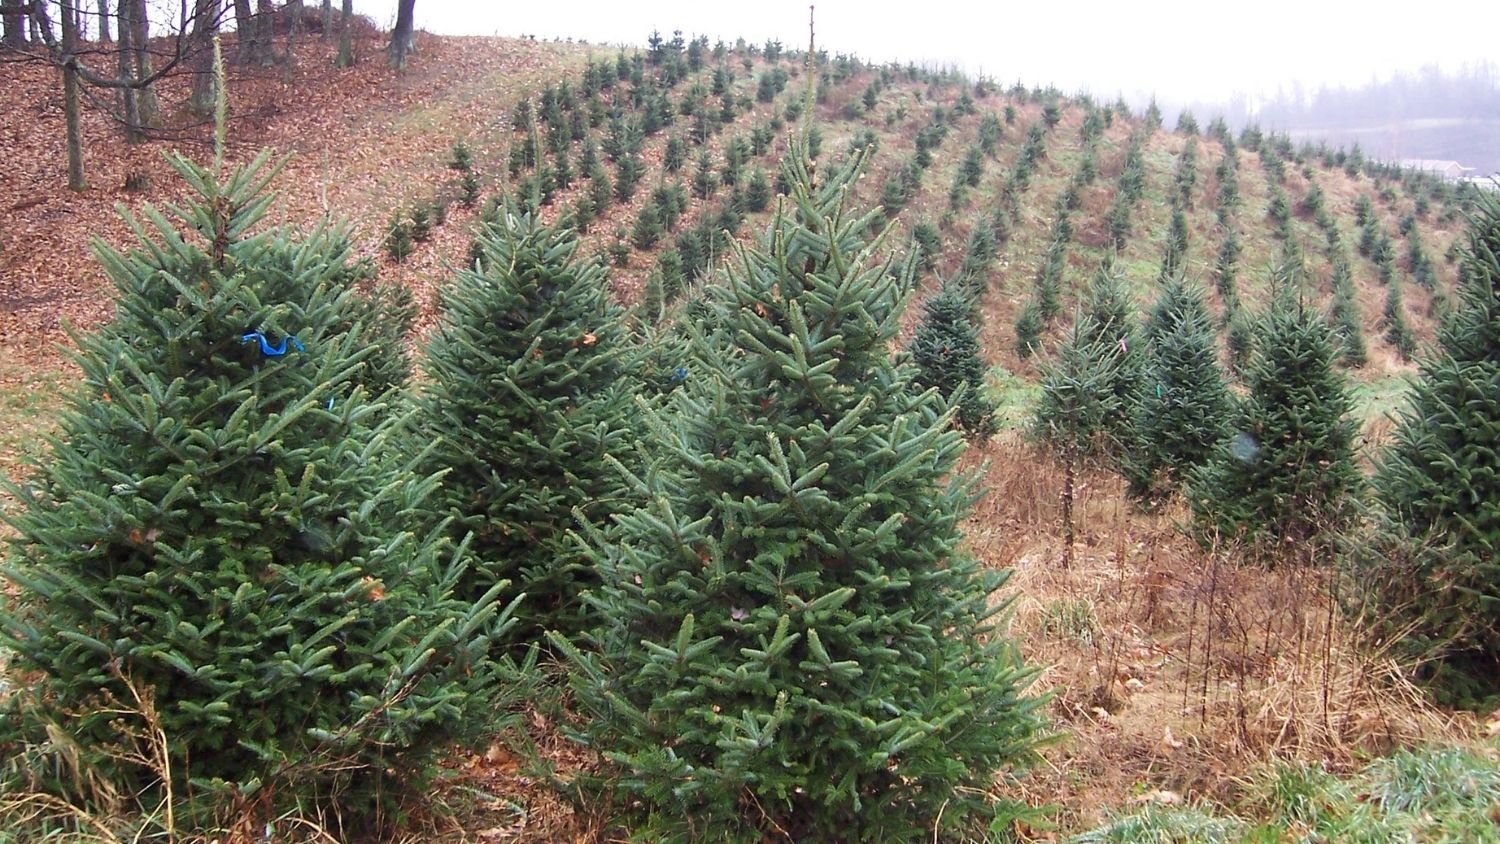 Christmas tree farm - Christmas Trees: Here's The Scoop on North Carolina's Crop - College of Natural Resources News NC State University